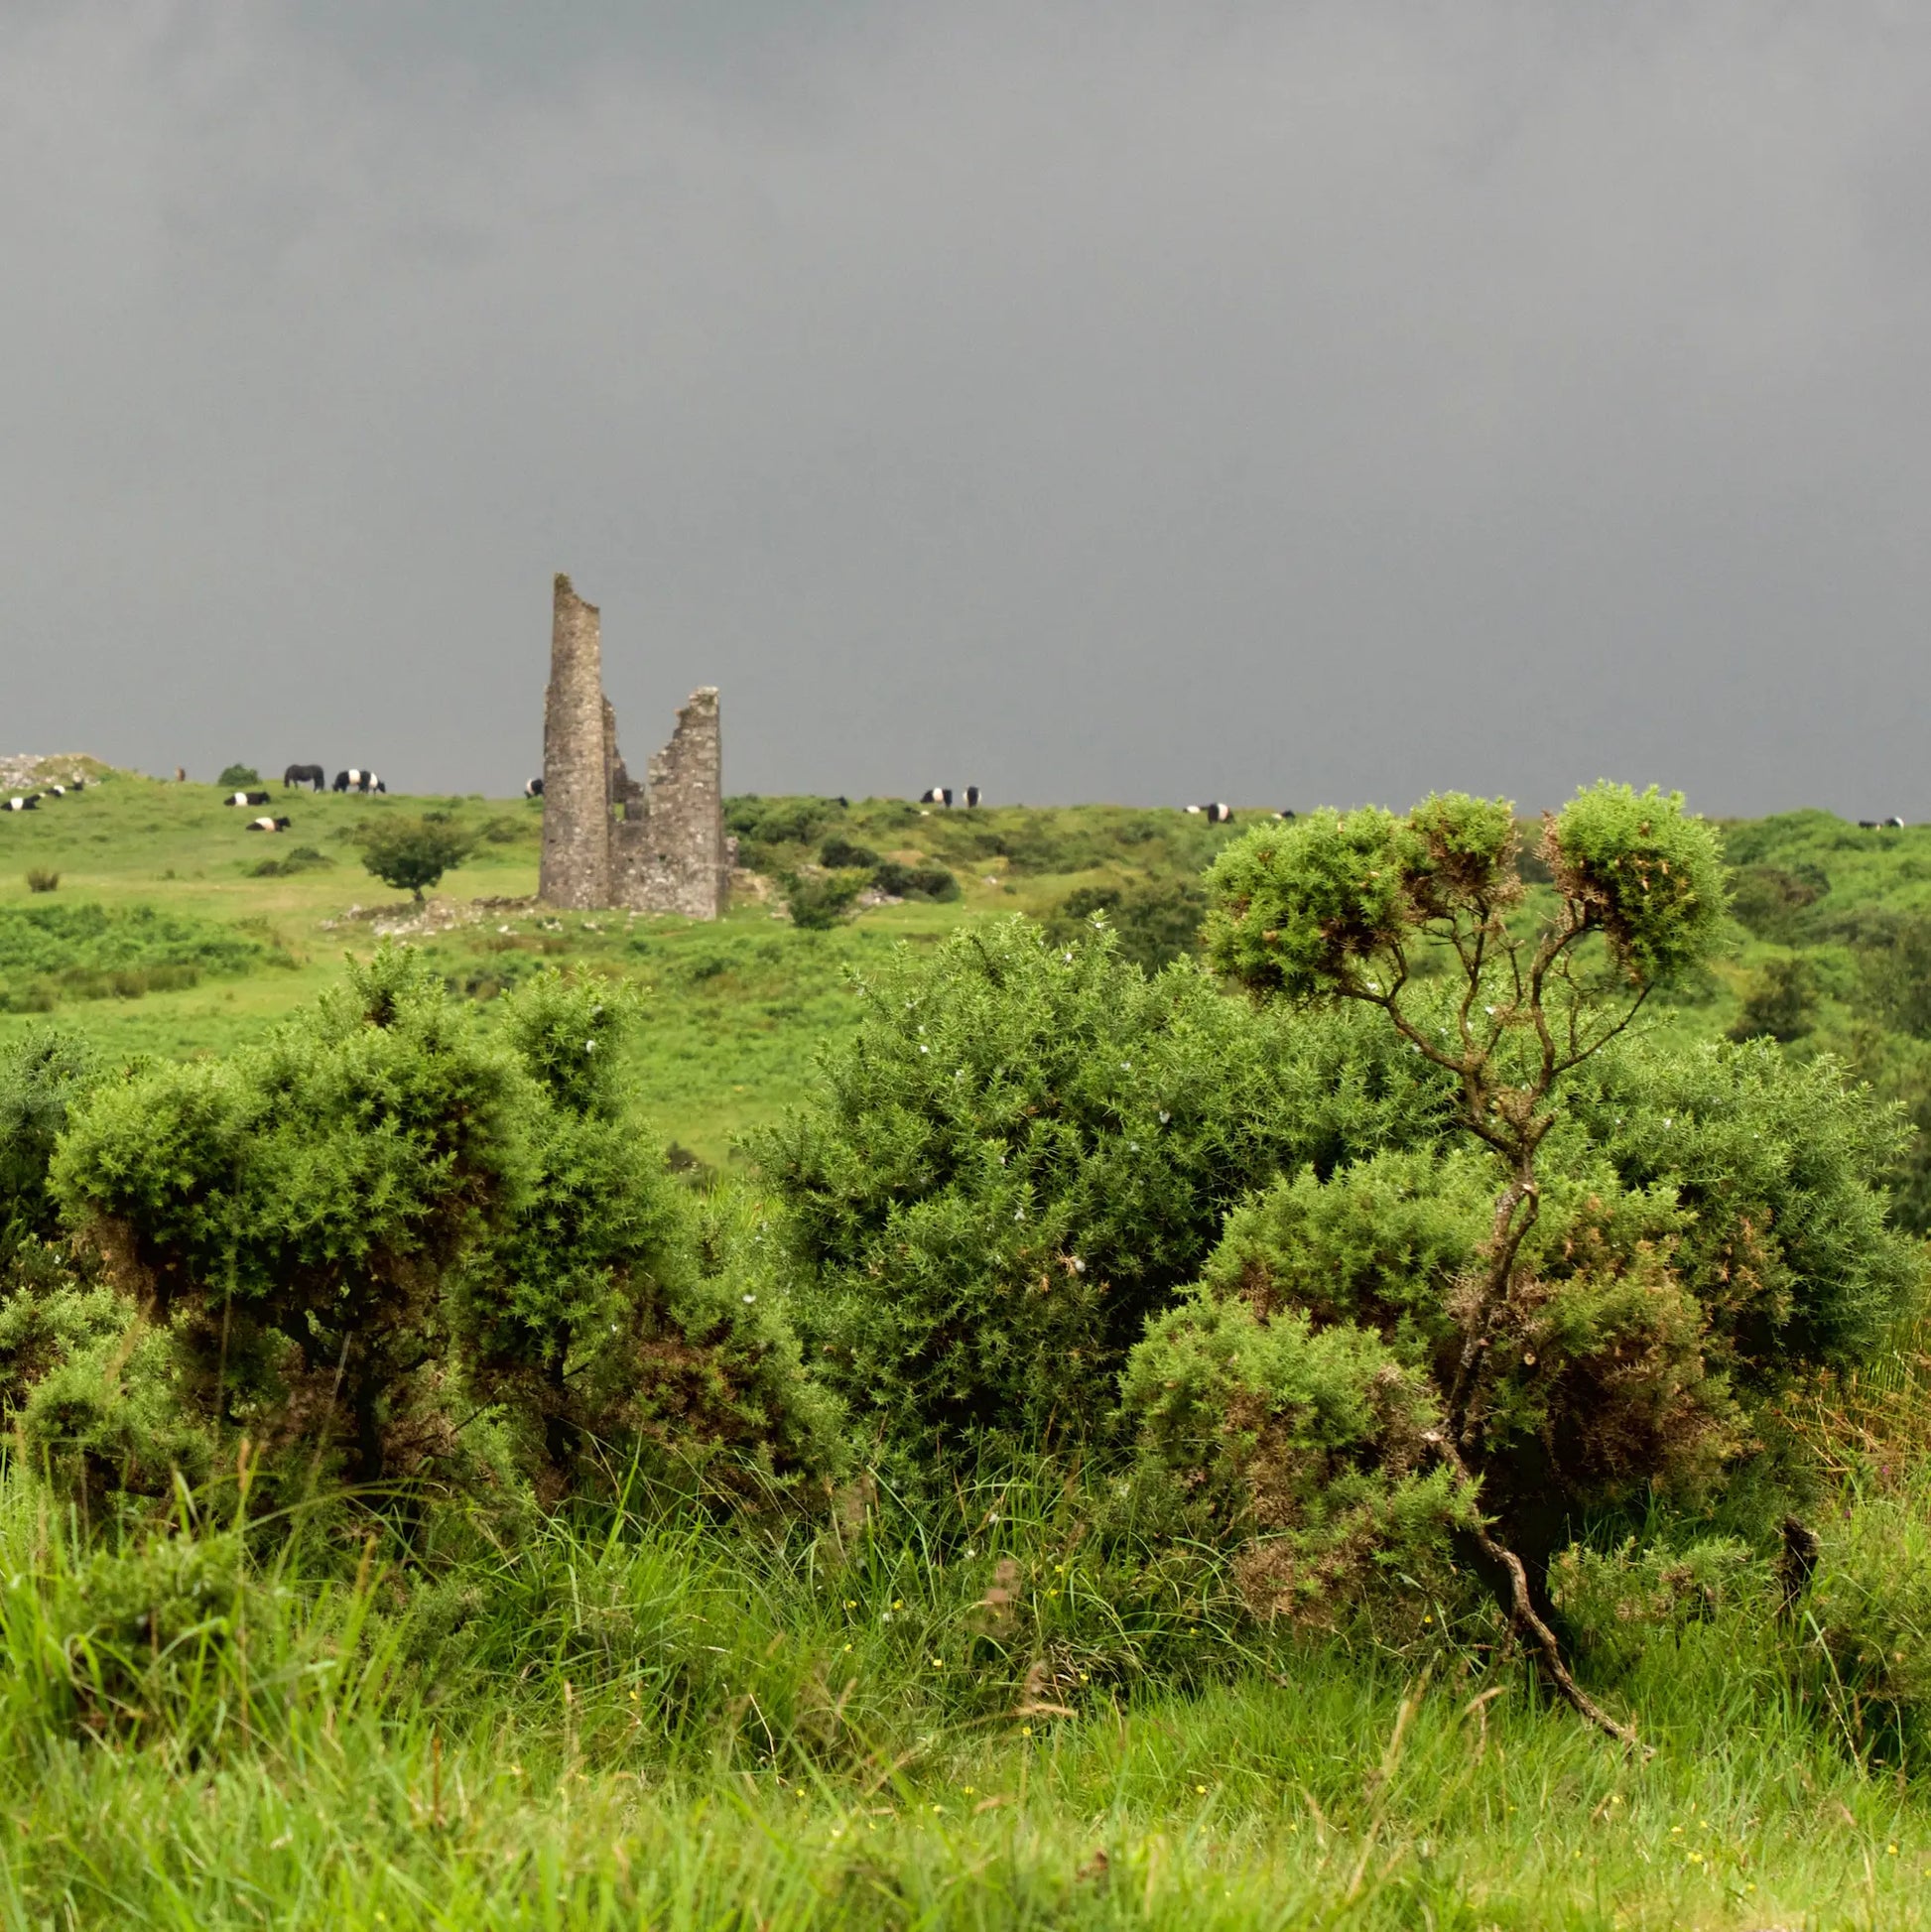 Cornish greetings card image of engine house ruin at Minions on Bodmin Moor, with gorse in the foreground and belted galloway cattle in the distance